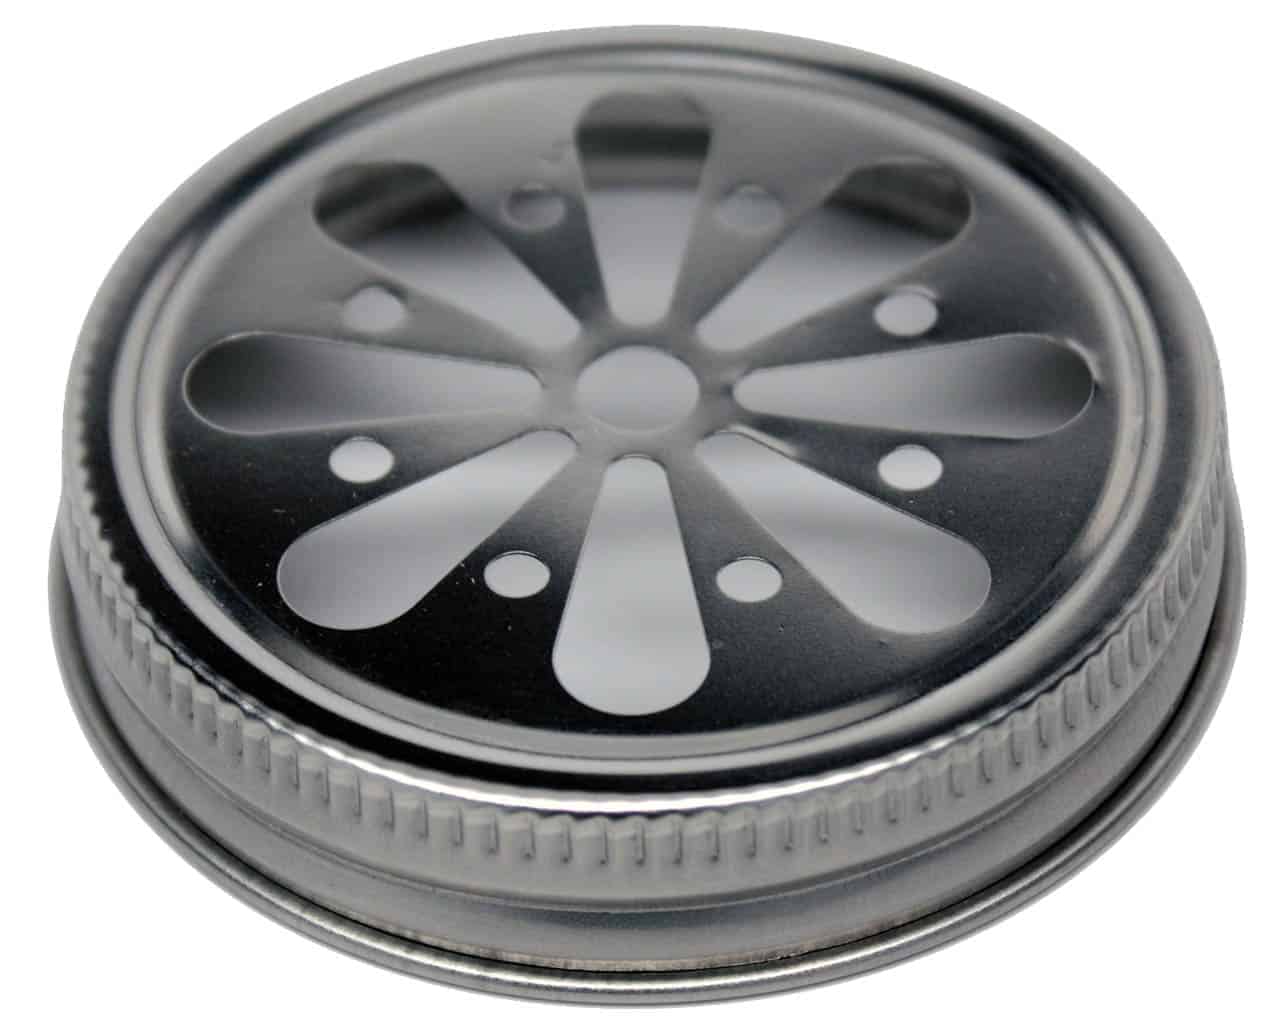 Stainless Steel Daisy Cut Lid for Mason Jars